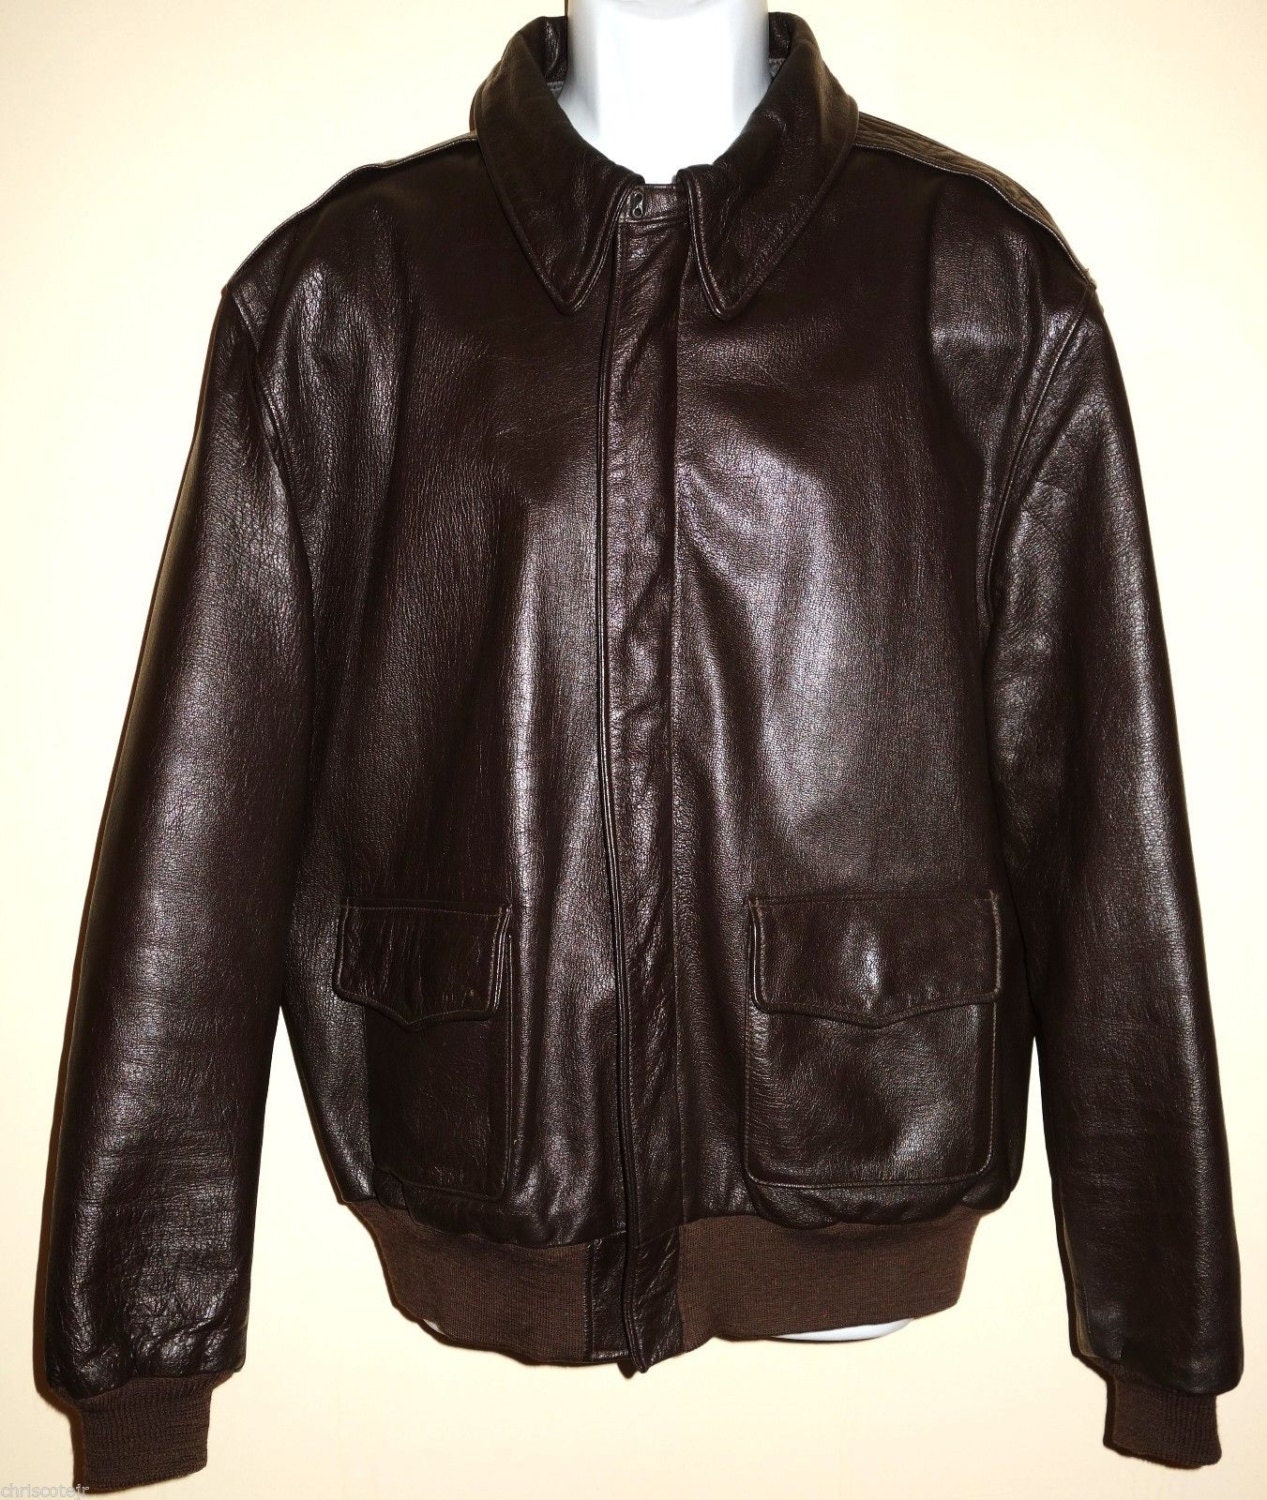 Vintage Men's Willis & Geiger A-2 Leather by RareRecycledRetro